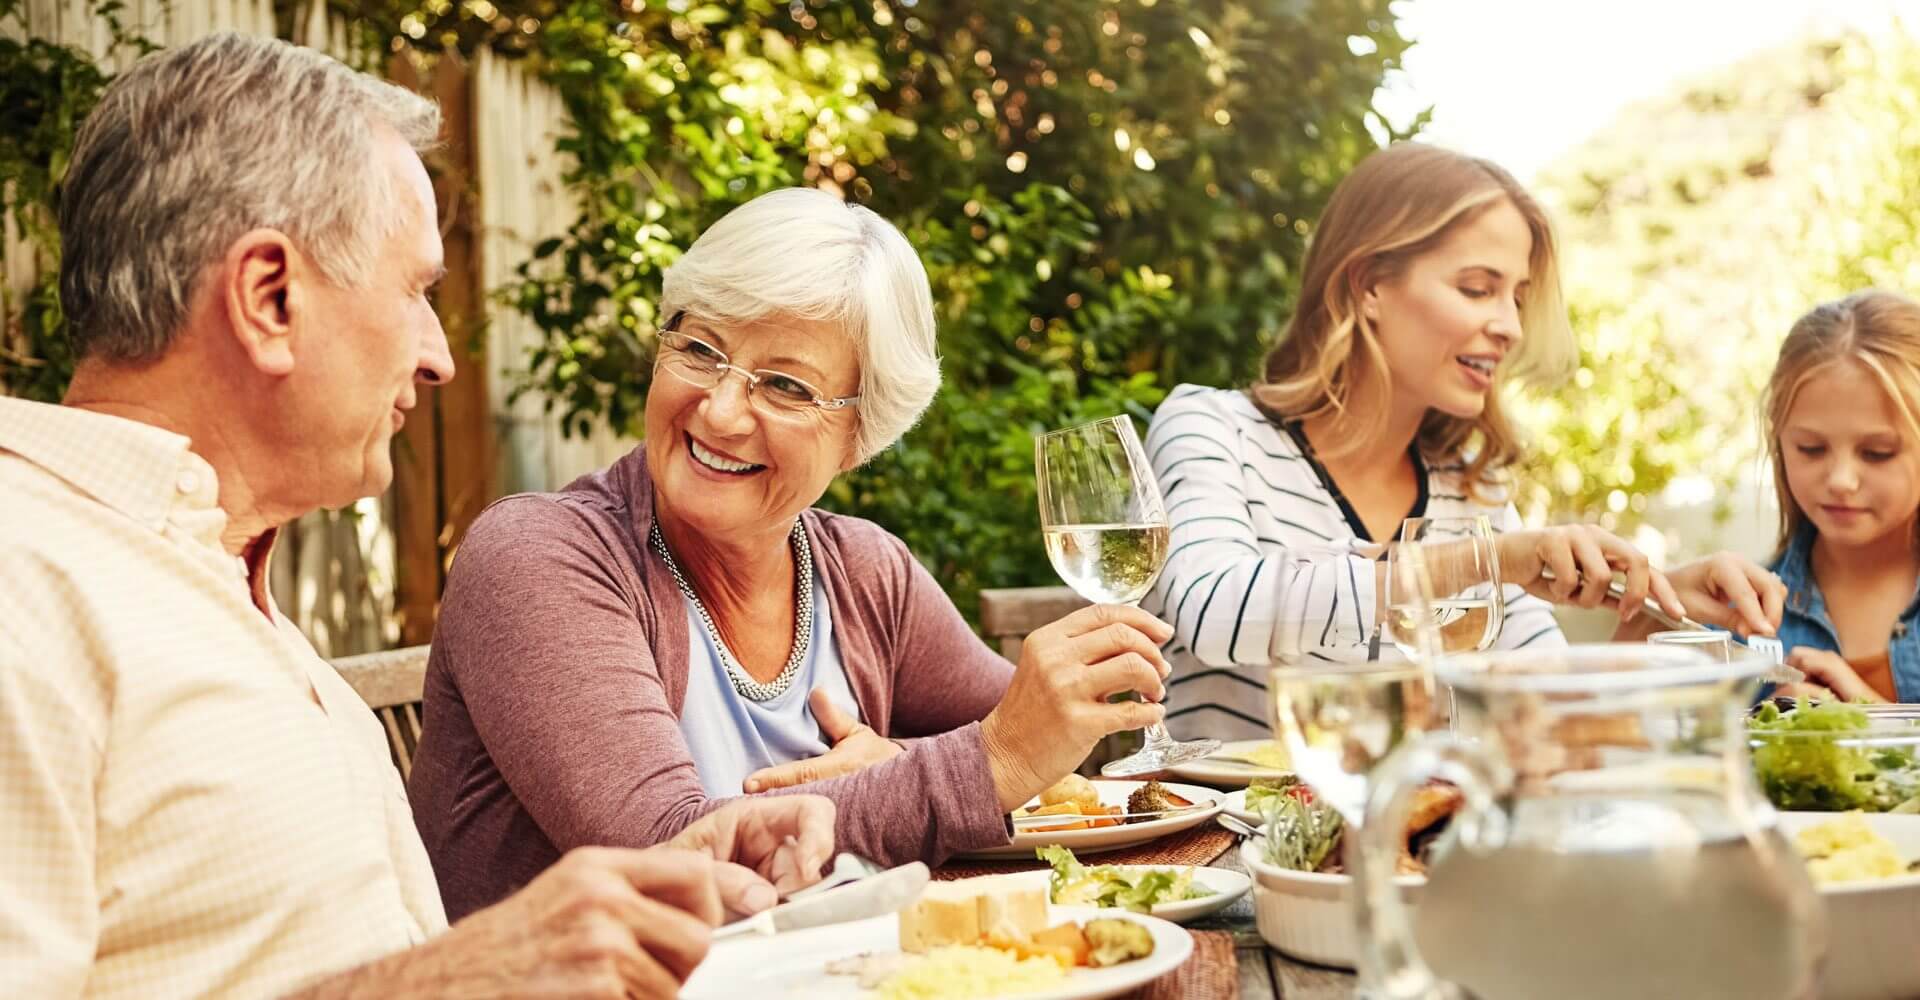 Giving clients the gift of generations as three generations of people in a family sit at a dinner table enjoying a meal together.